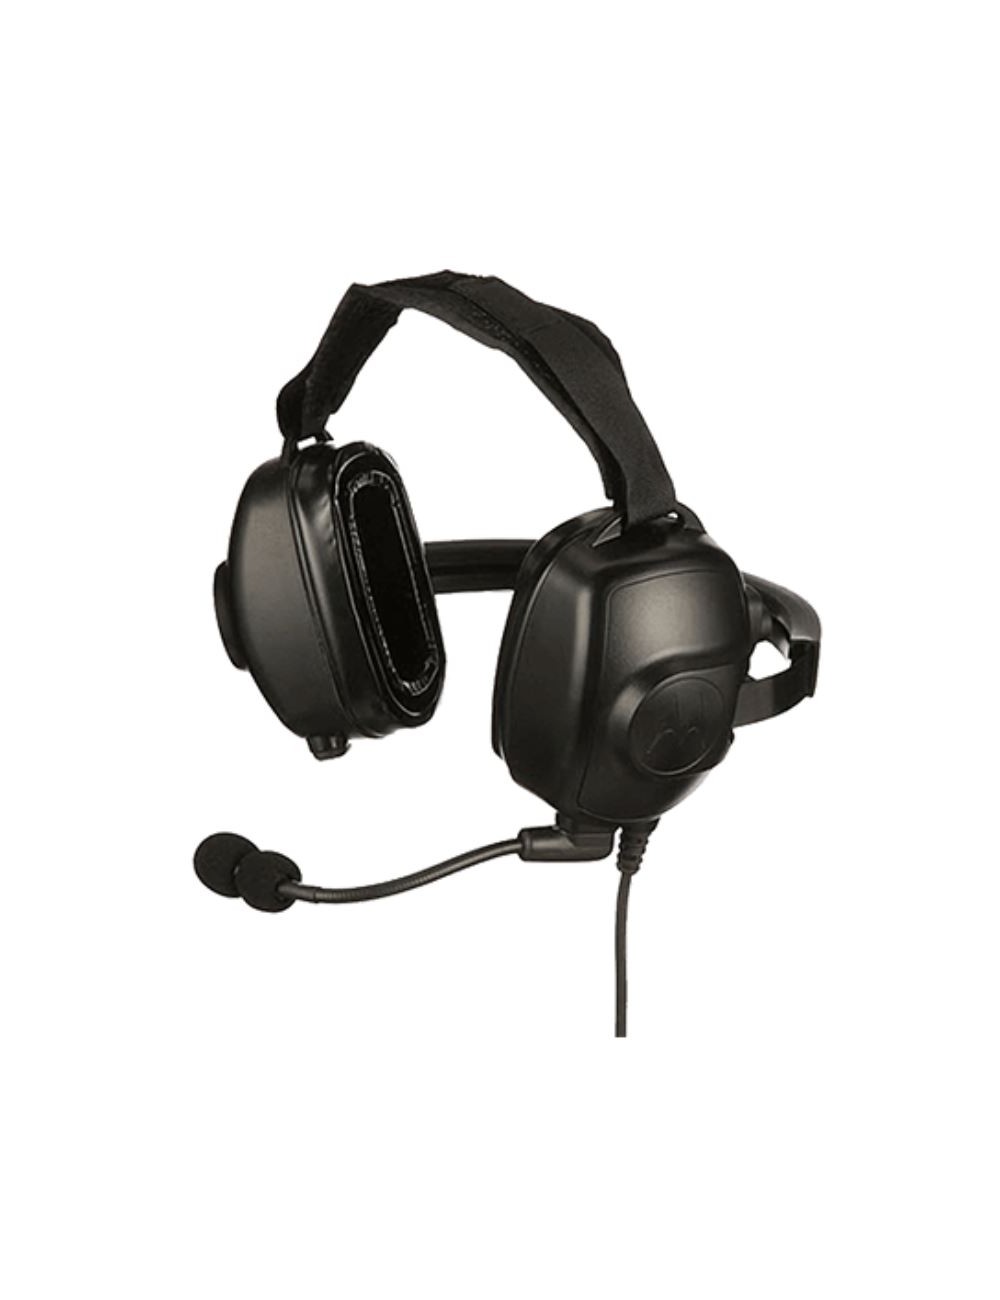 Heavy Duty Behind-the-Head Headset PMLN8085A